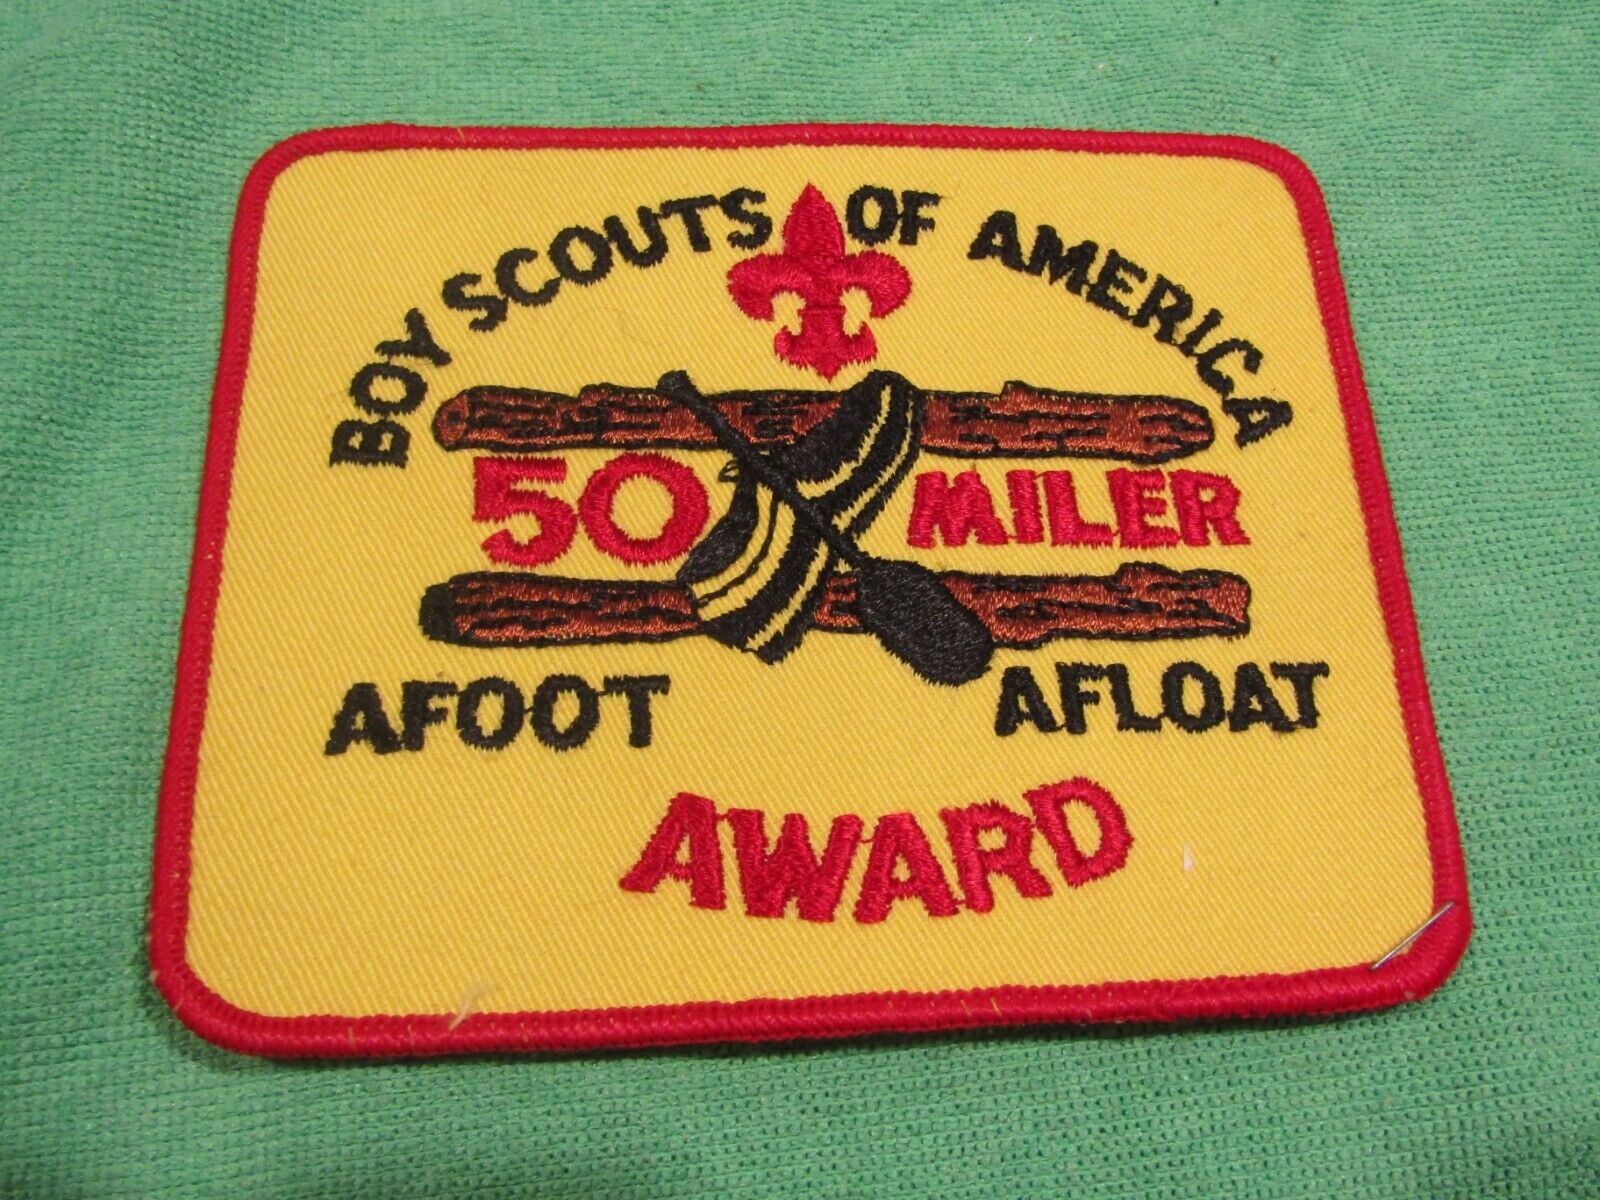 Boy Scouts Of America 50 Miler Afoot Afloat Award Patch